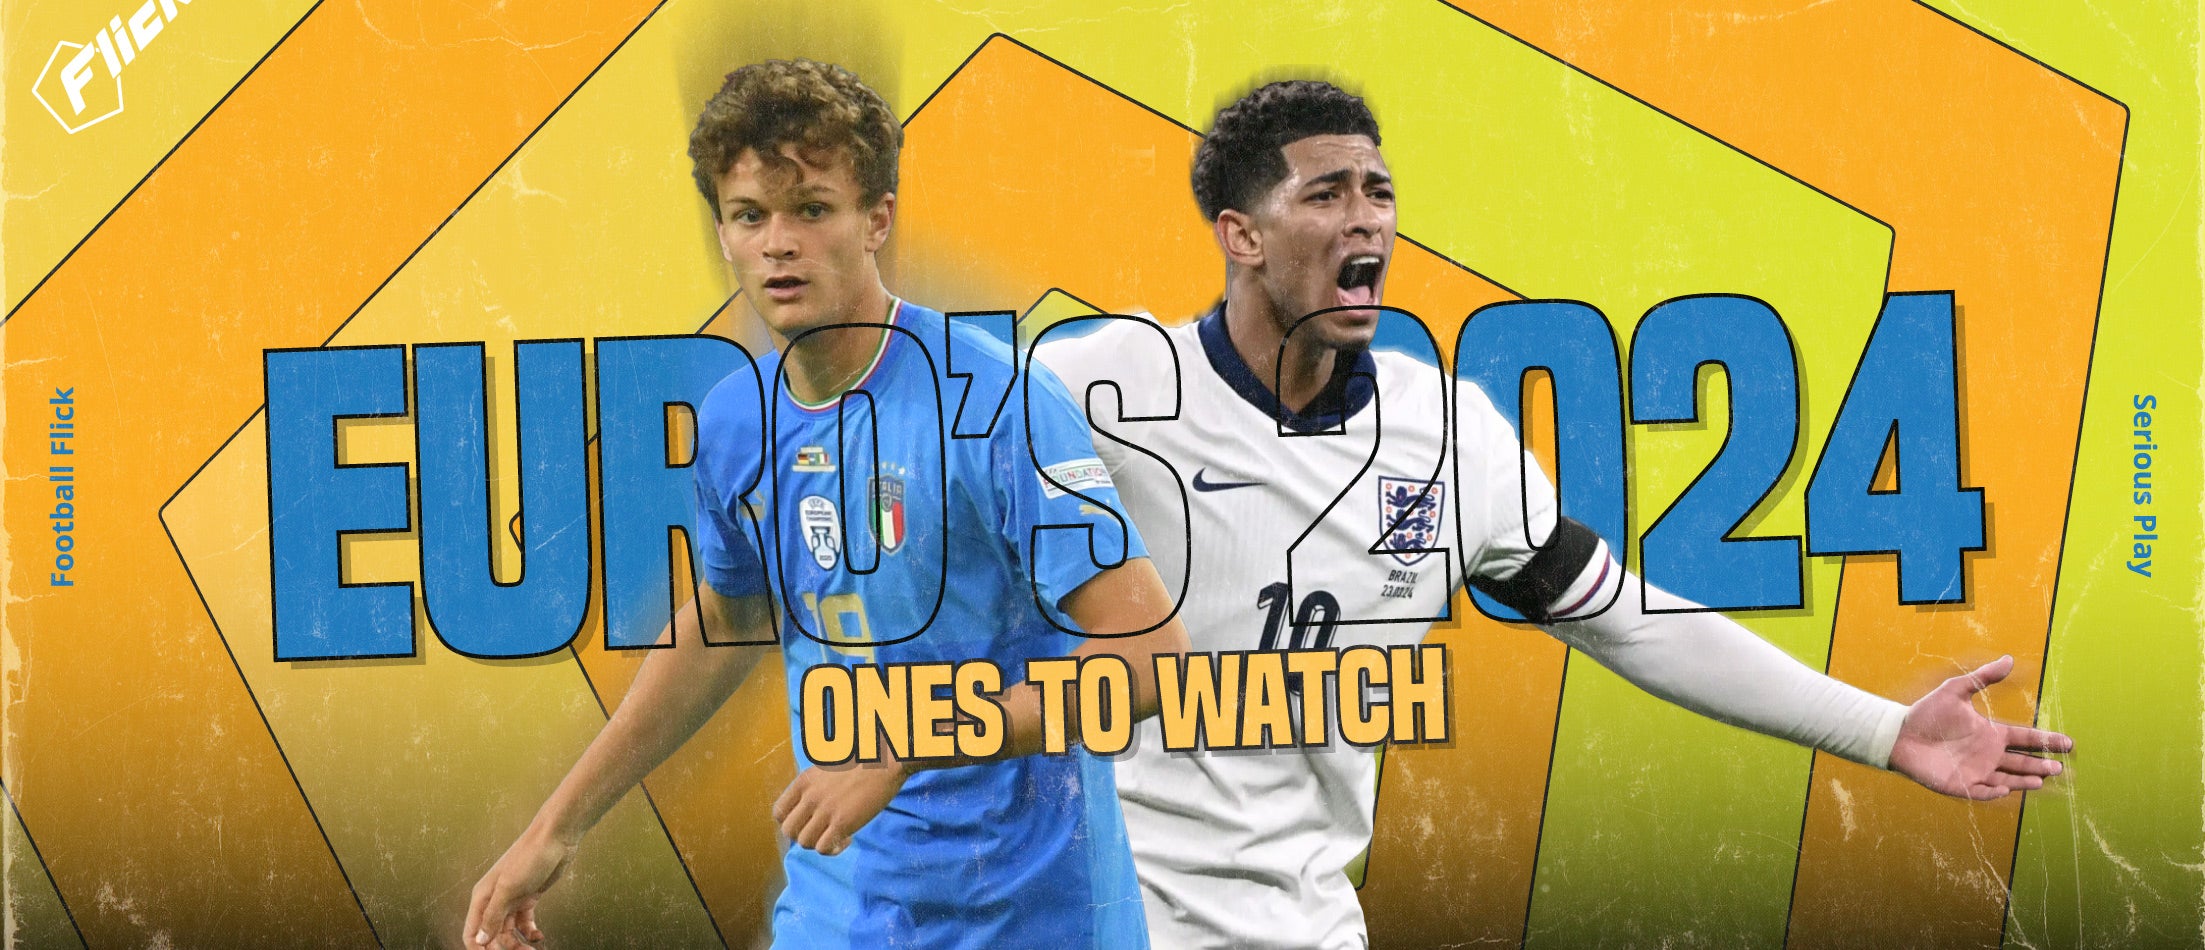 Euro 2024 Germany - Young Players to Watch in this years tournament.